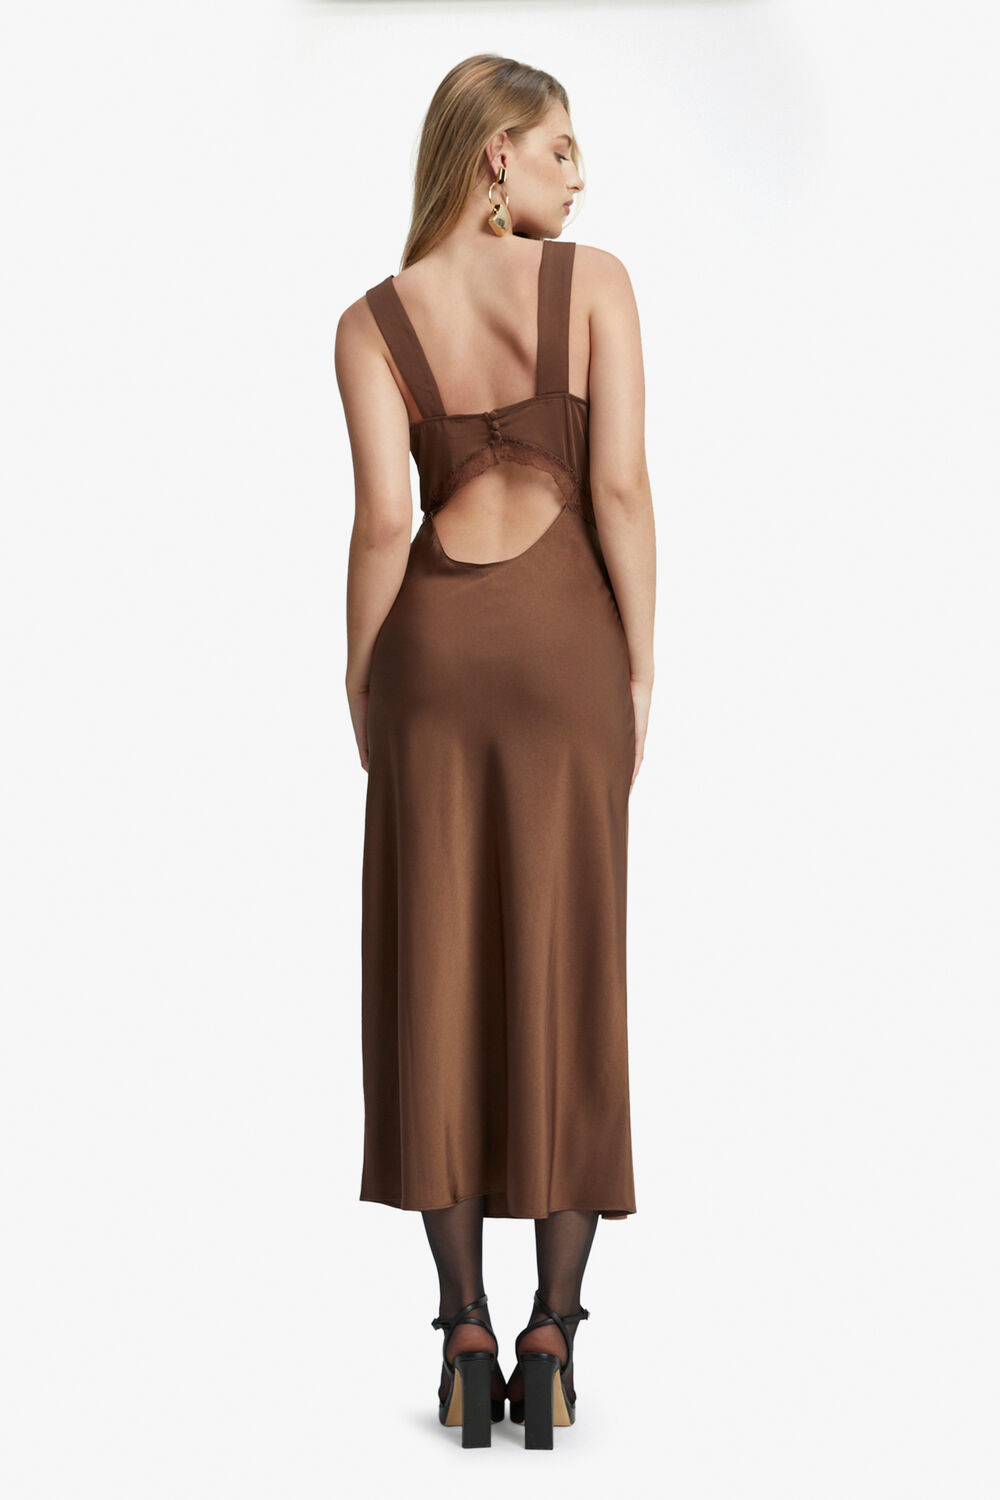 EMORY LACE SLIP DRESS in colour CHOCOLATE BROWN